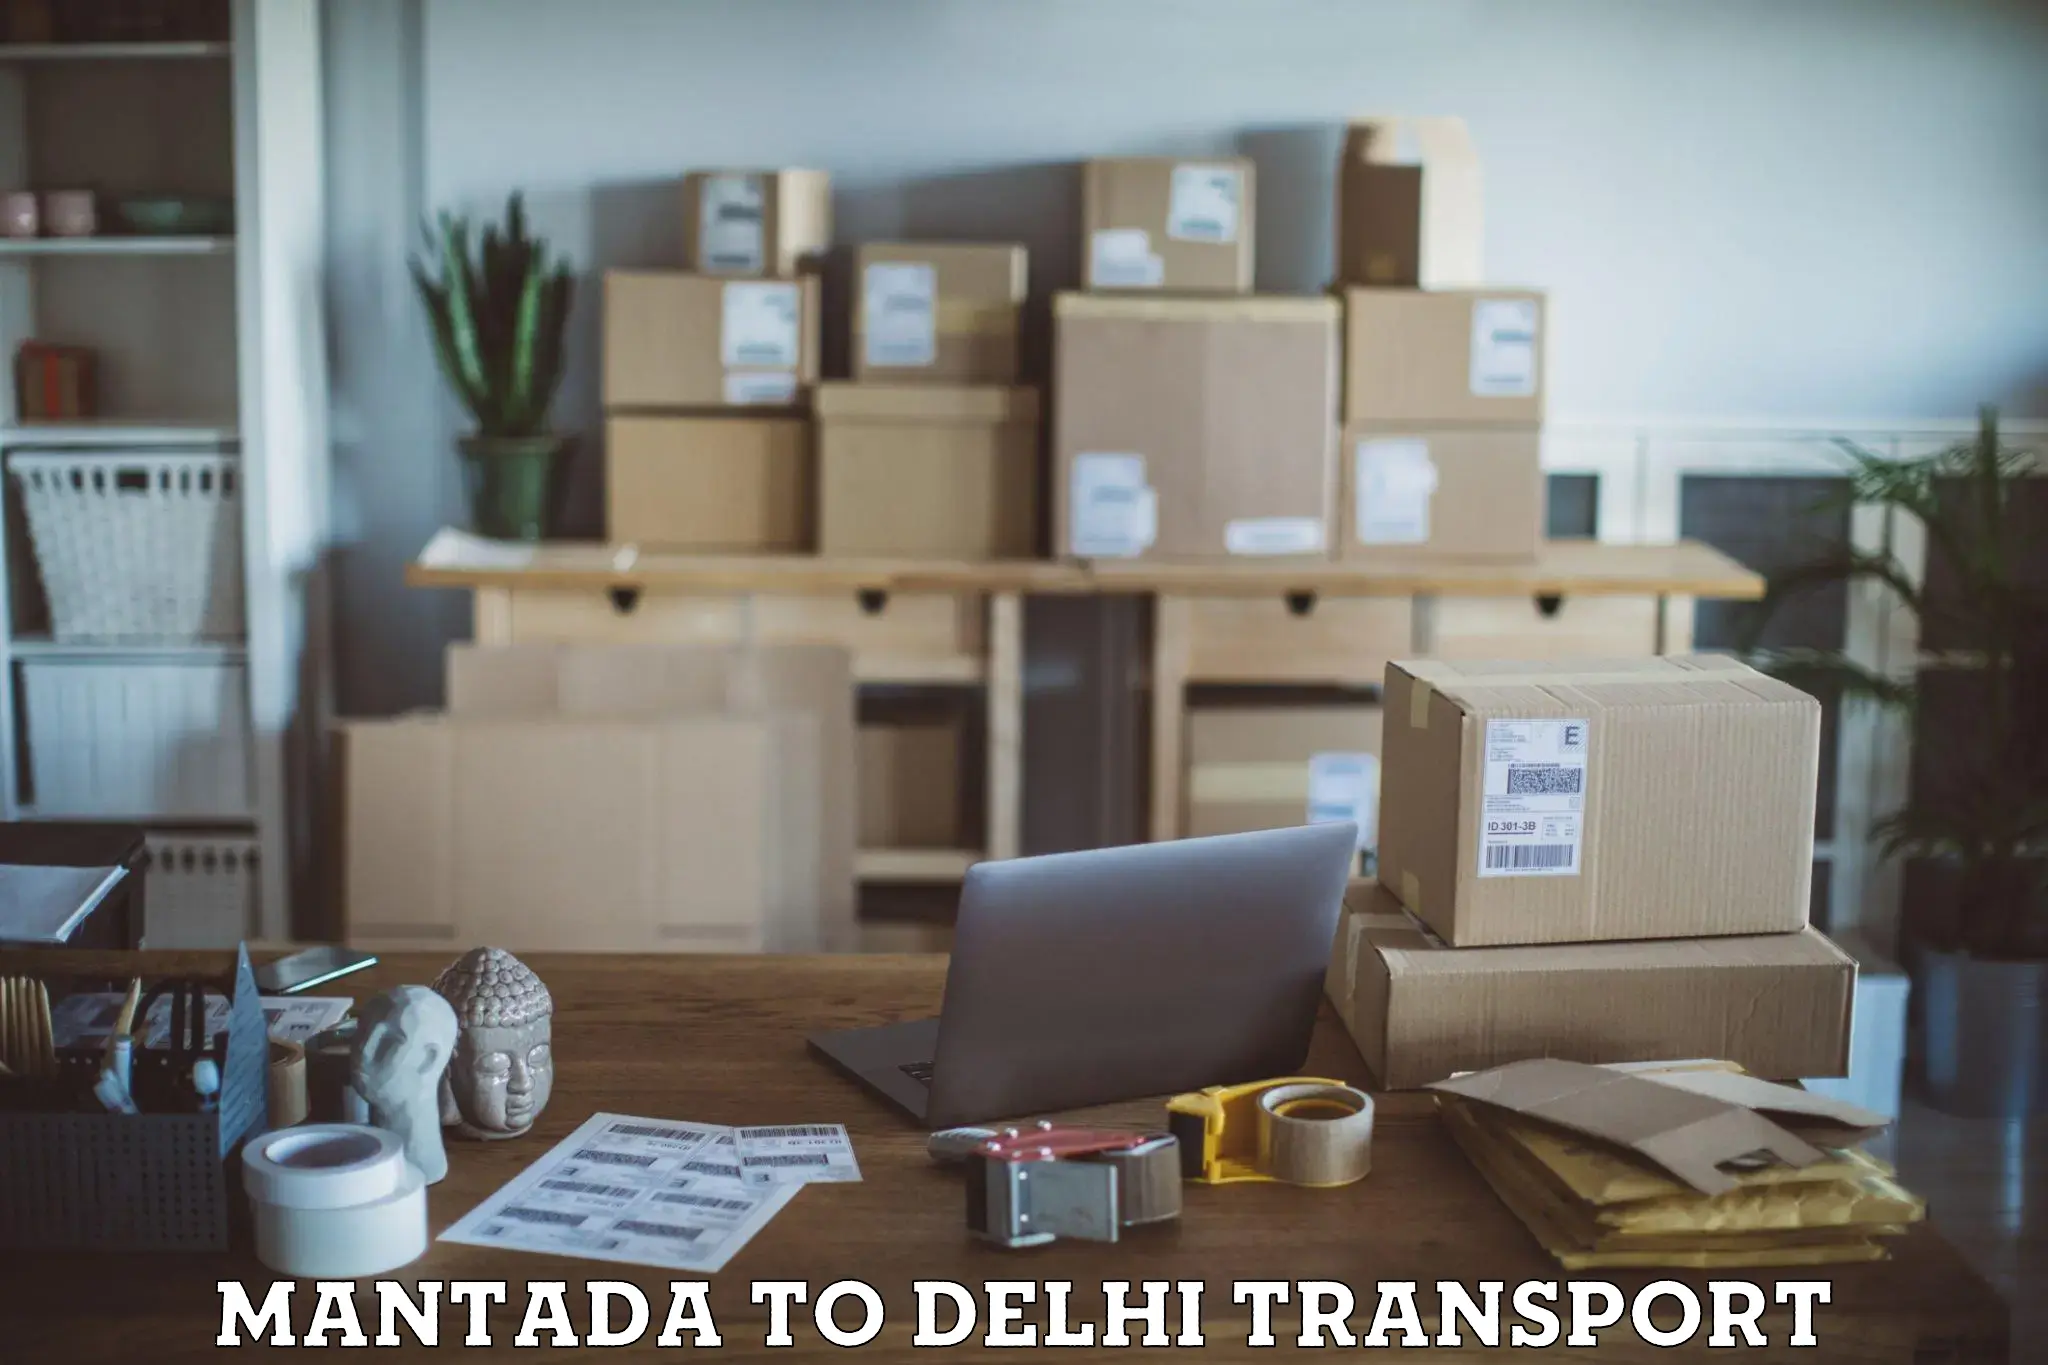 Package delivery services Mantada to Lodhi Road